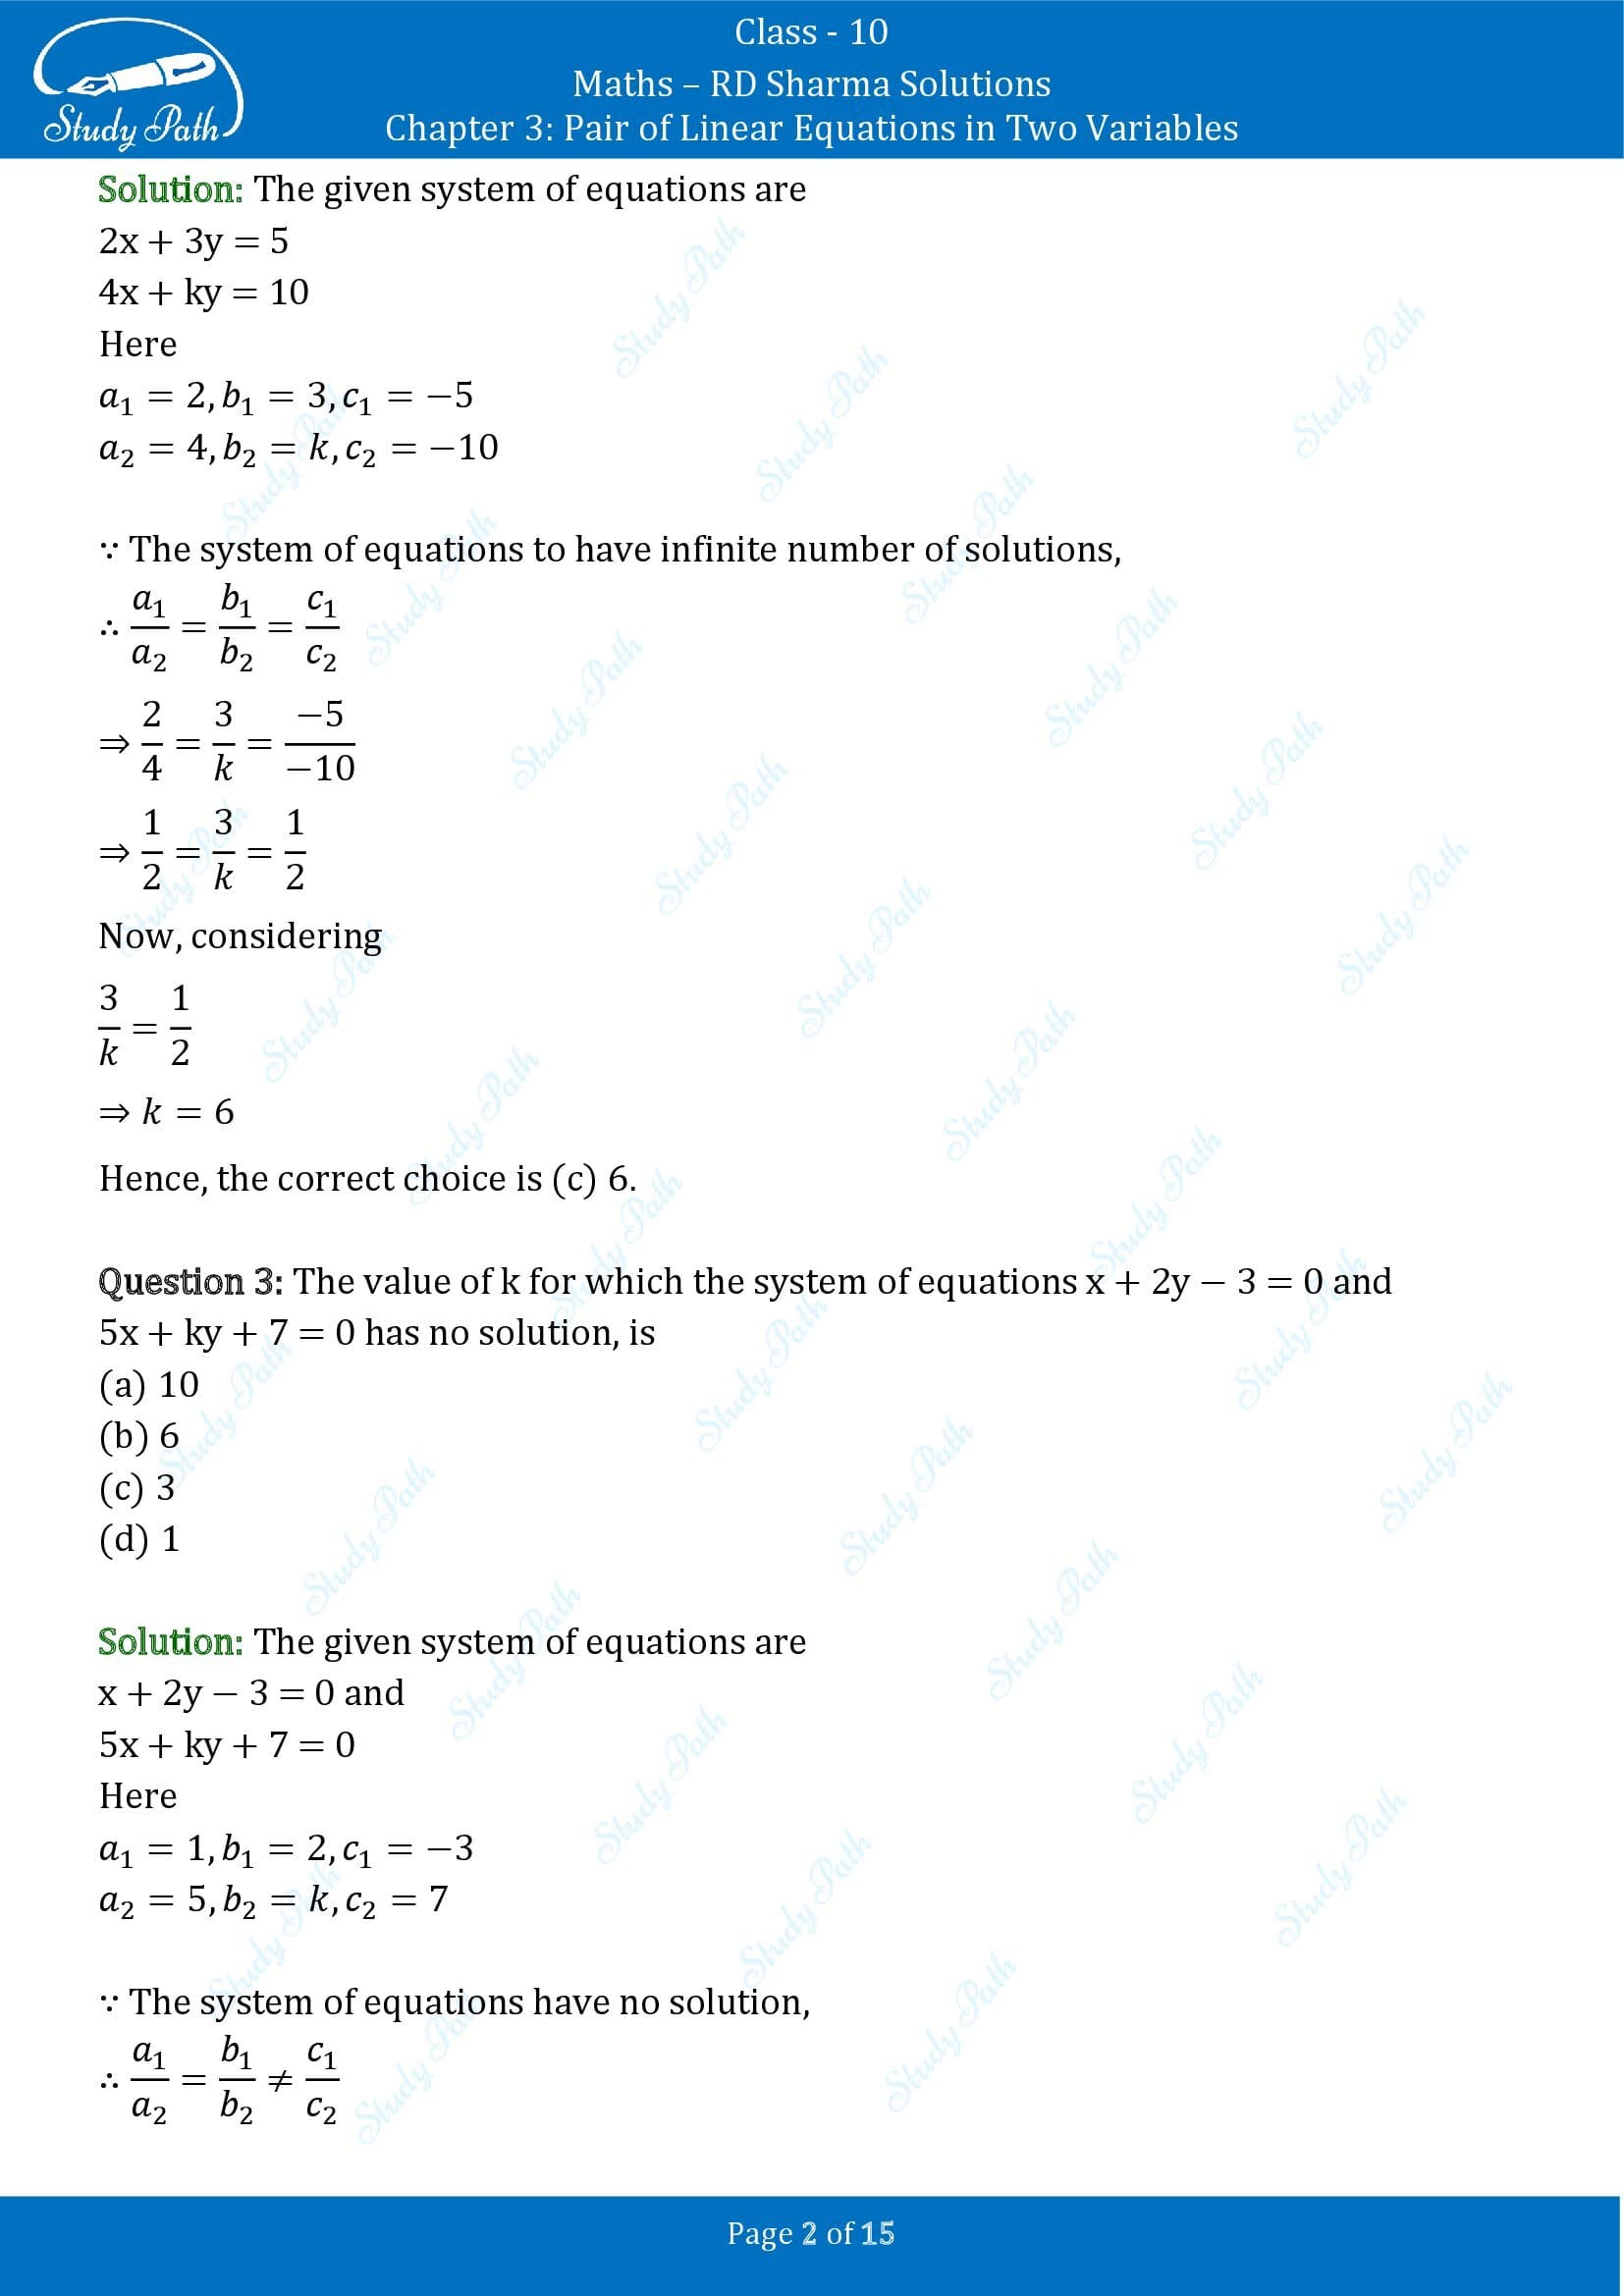 RD Sharma Solutions Class 10 Chapter 3 Pair of Linear Equations in Two Variables Multiple Choice Questions MCQs 00002